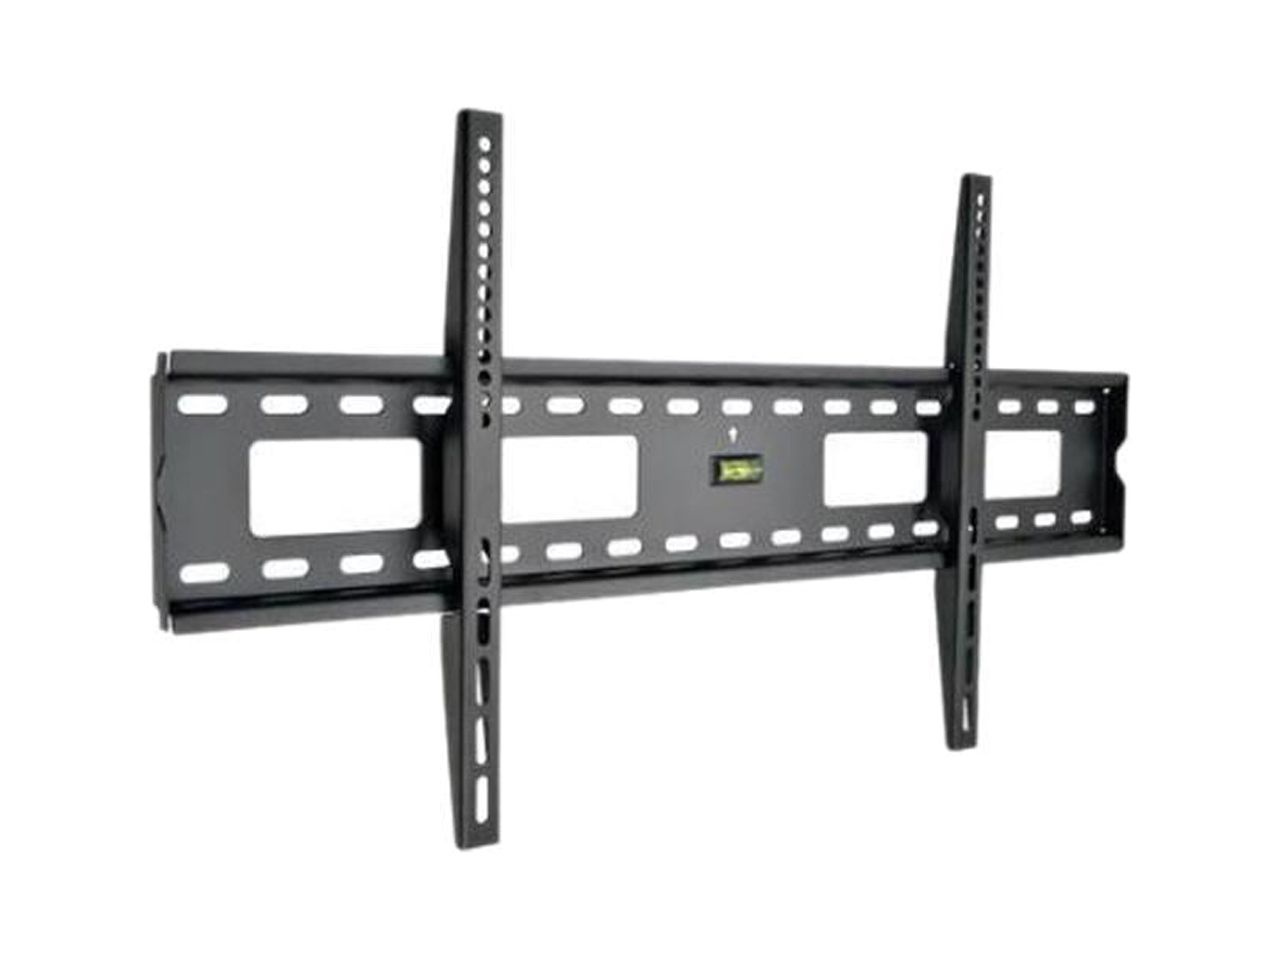 Tripp Lite DWF4585X 45"-85" Fixed TV wall mount LED & LCD HDTV up to VESA 800x400max load 200 lbs Compatible with Samsung, Vizio, Sony, Panasonic, LG and Toshiba TV - image 1 of 3